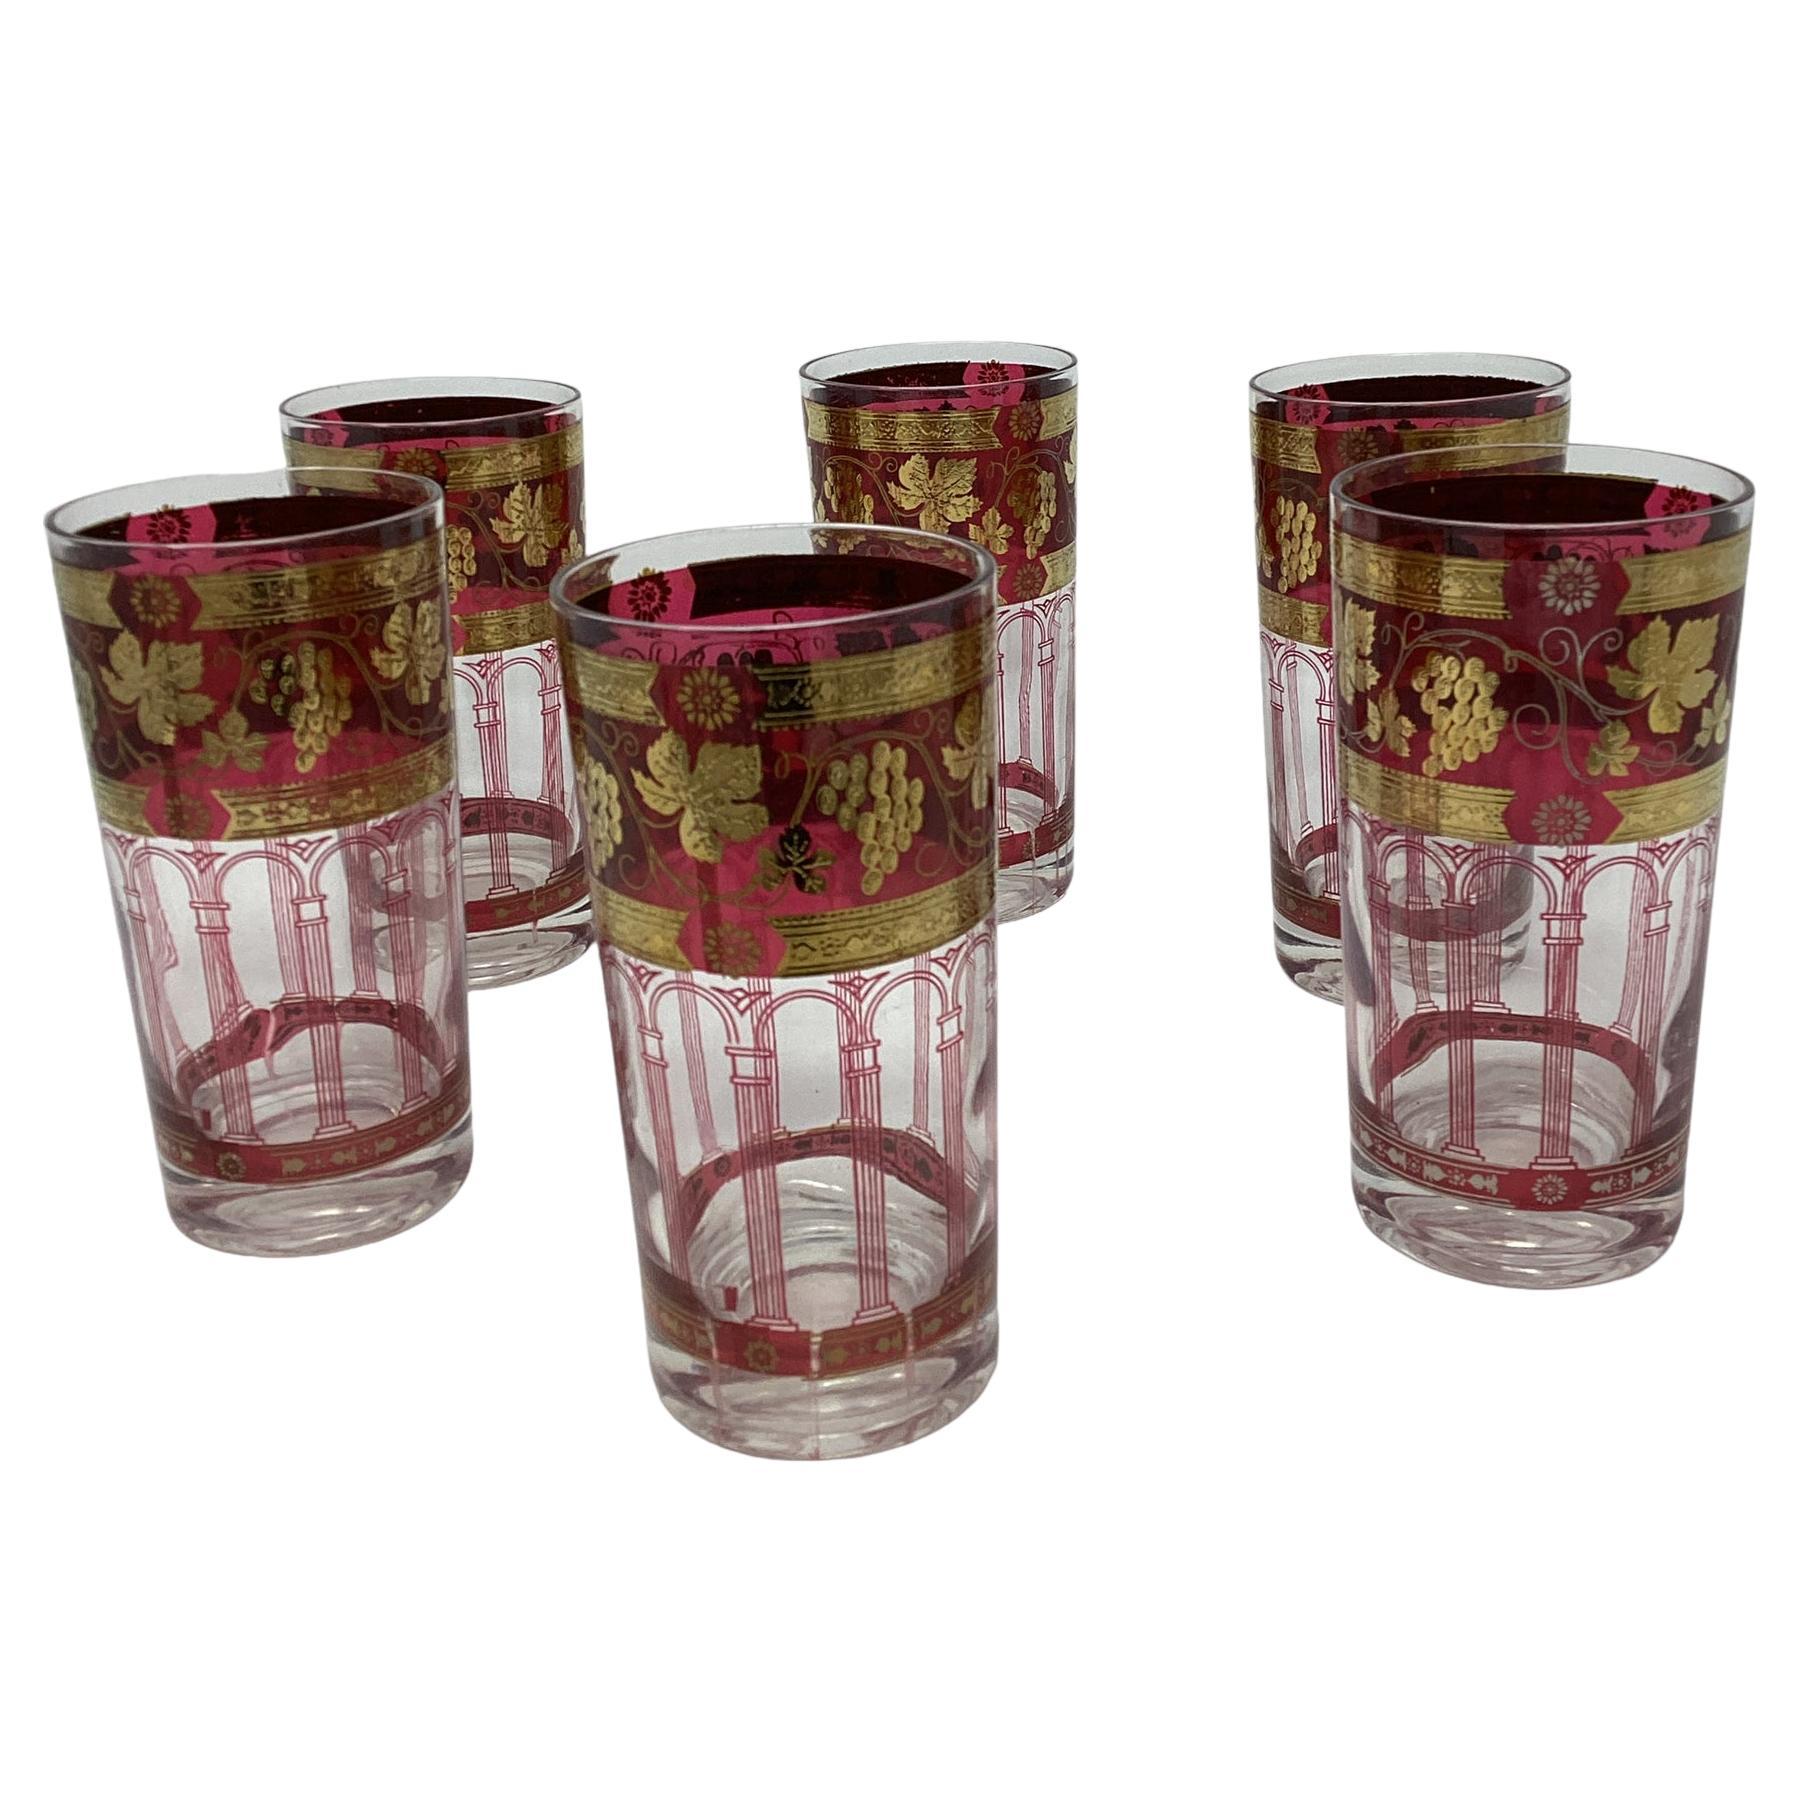 https://a.1stdibscdn.com/set-of-6-cera-cranberry-highball-glasses-with-grapes-and-arched-columns-for-sale/f_73712/f_360762421694199563975/f_36076242_1694199564497_bg_processed.jpg